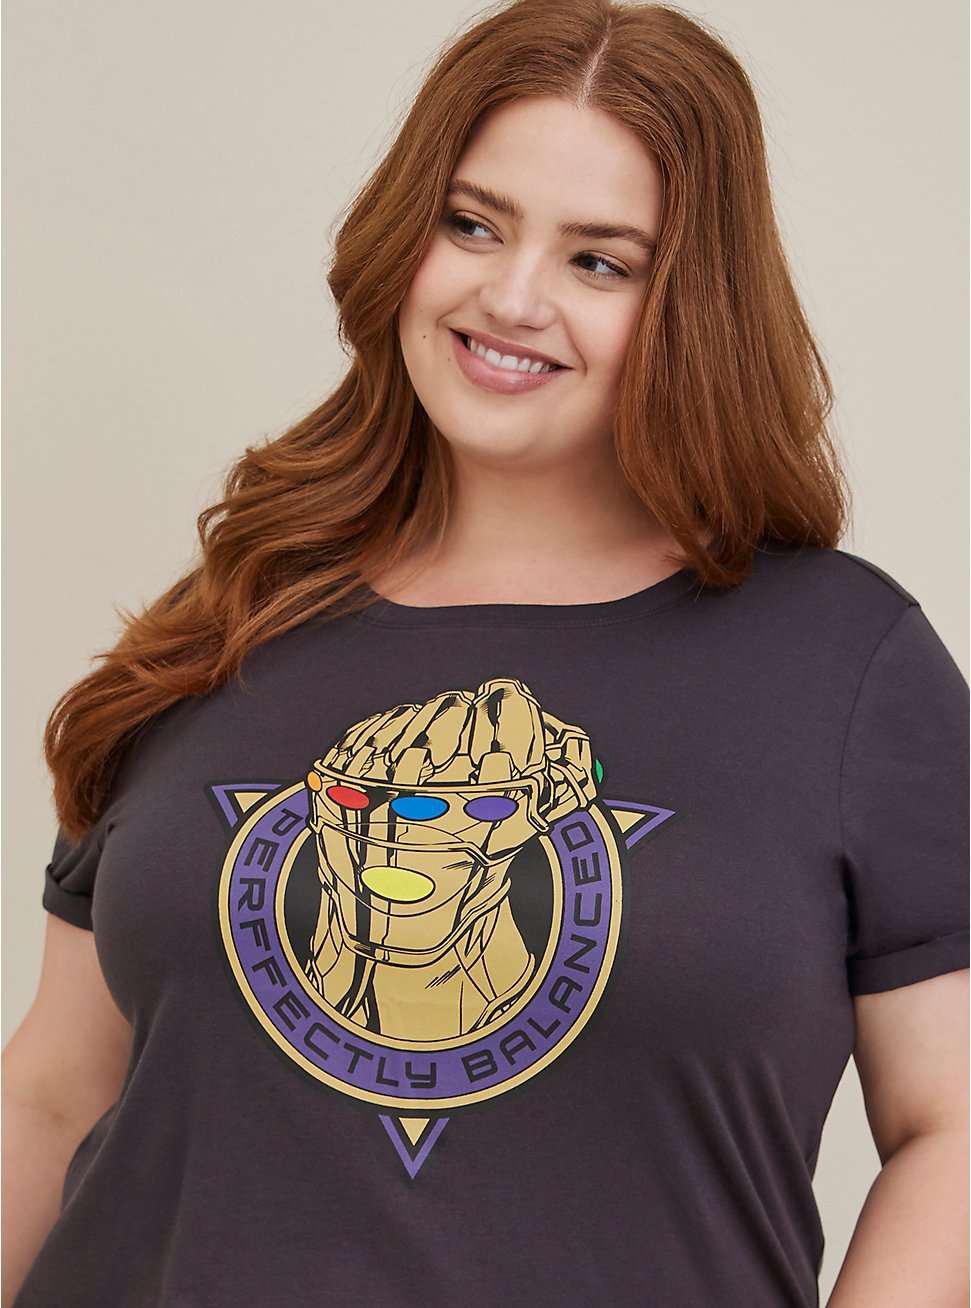 Marvel Thanos Relaxed Fit Roll Sleeve Top - Heritage Cotton Gauntlet Grey , GREY, hi-res